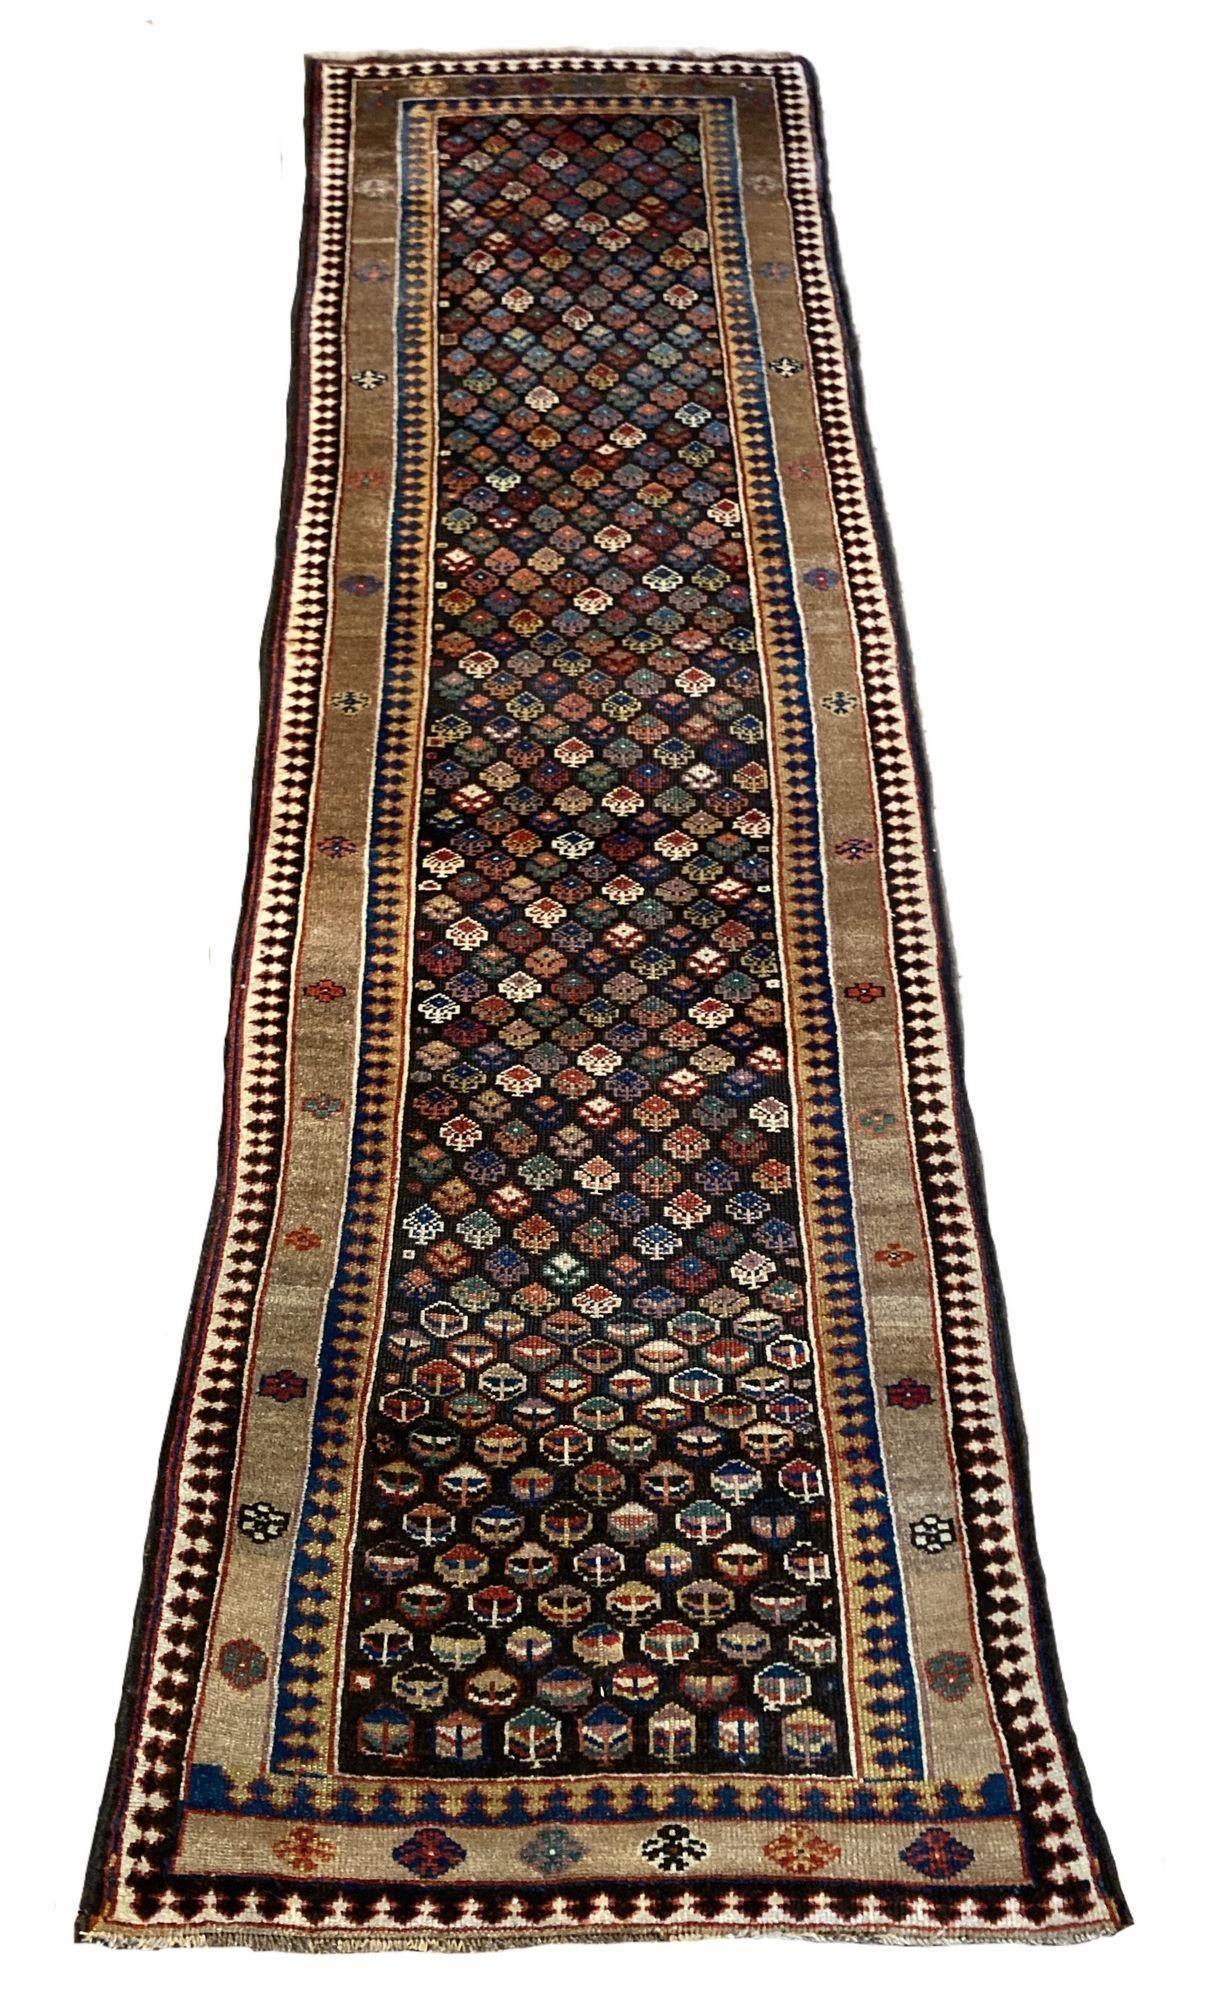 A fabulous antique Kurdish runner, hand woven circa 1900. The design features an all over geometrical design on a deep chocolate field encased by a simple camel coloured border. Lovely wool quality and great secondary colours of blues, greens, golds